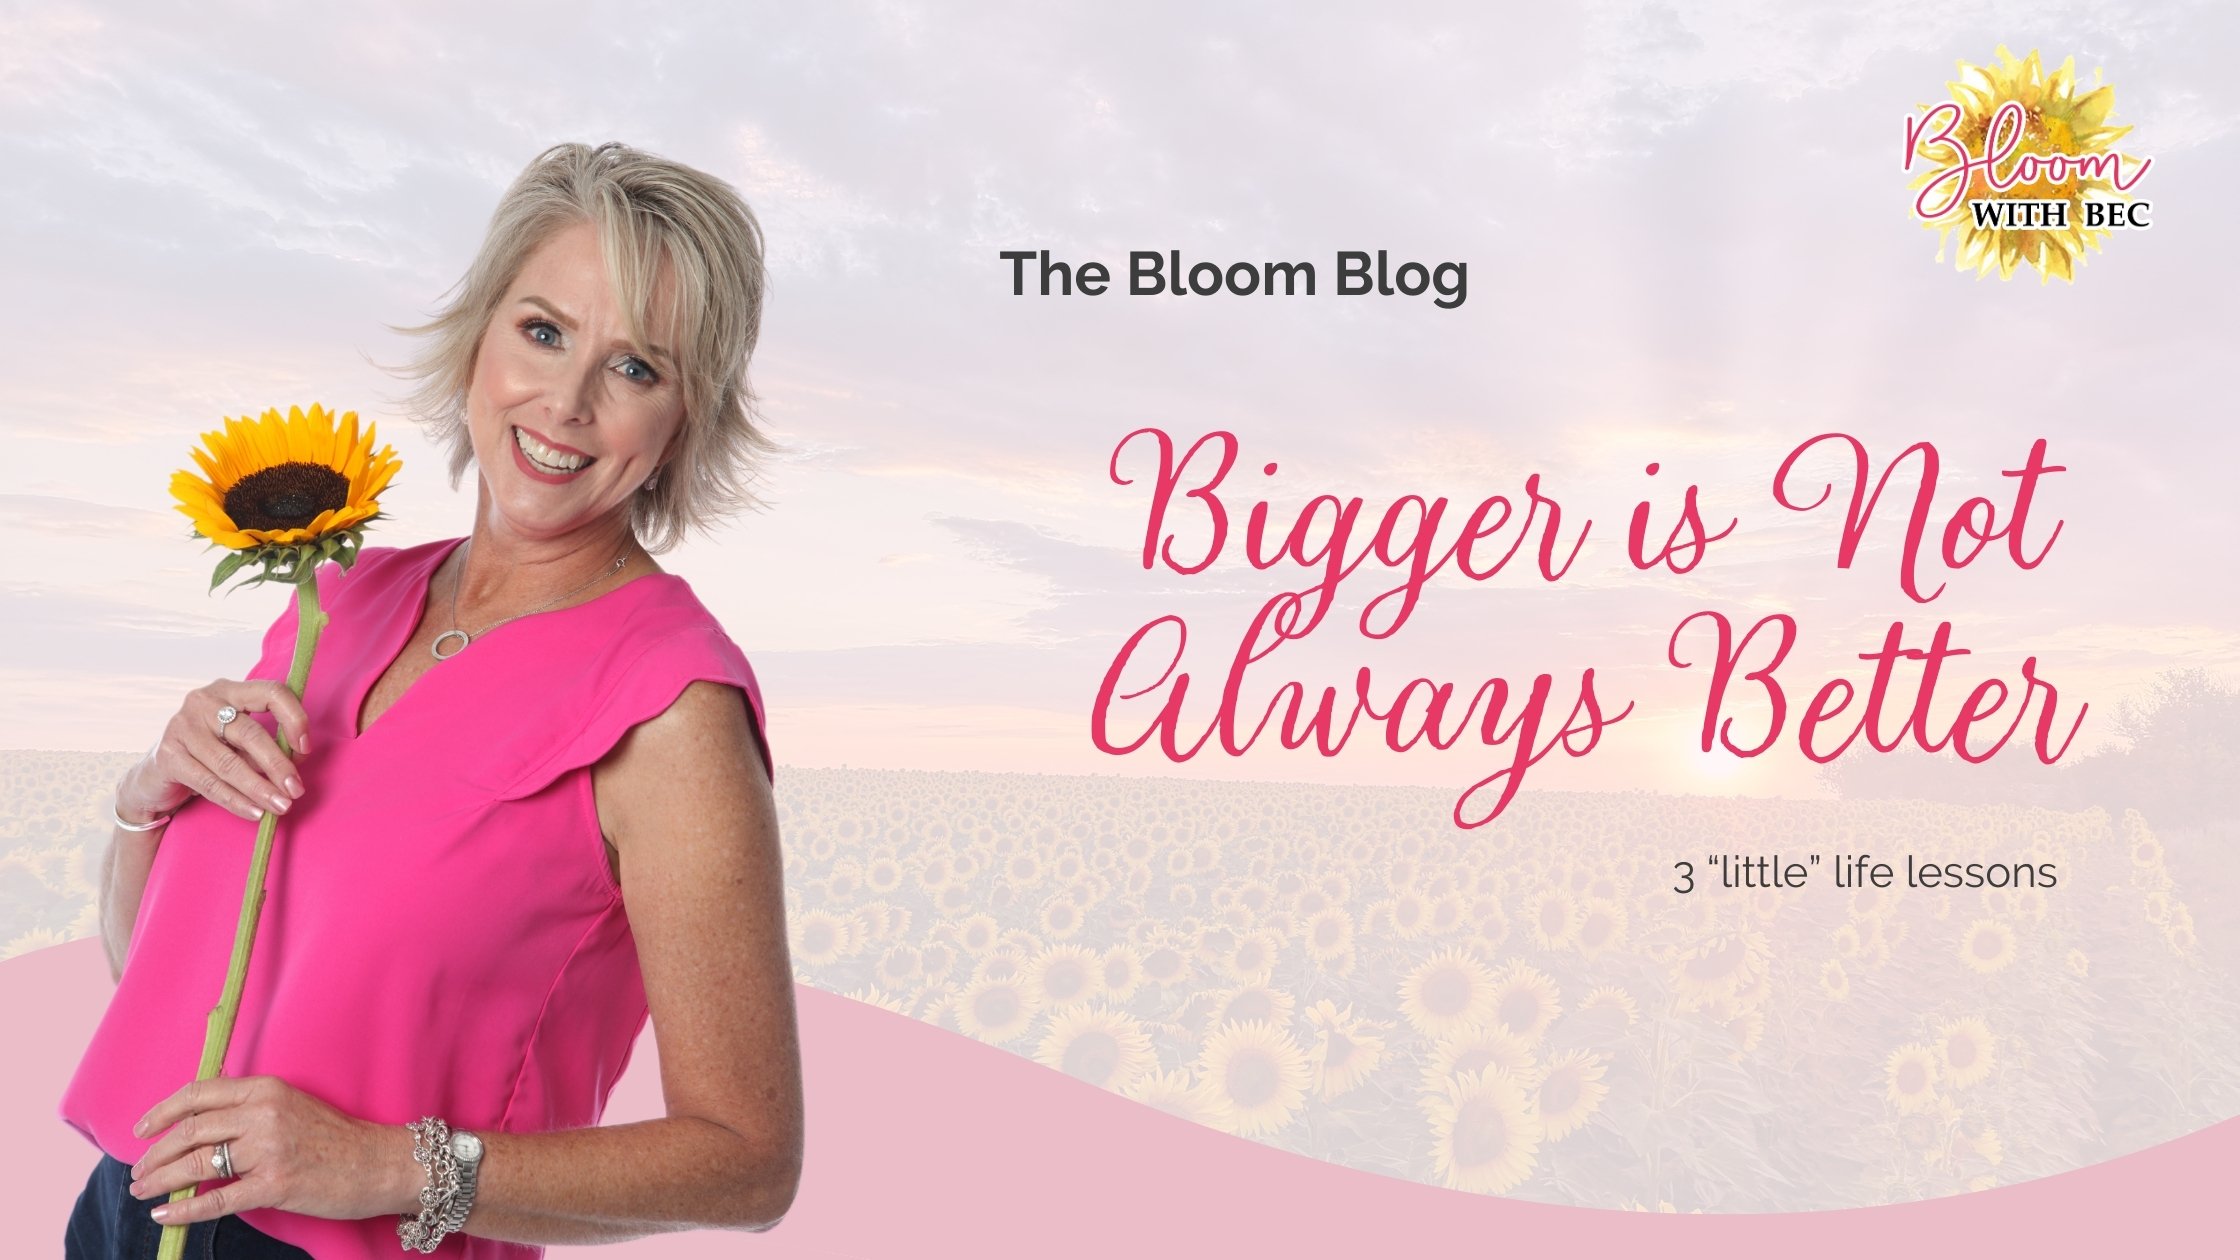 If the flower does not bloom - Blog